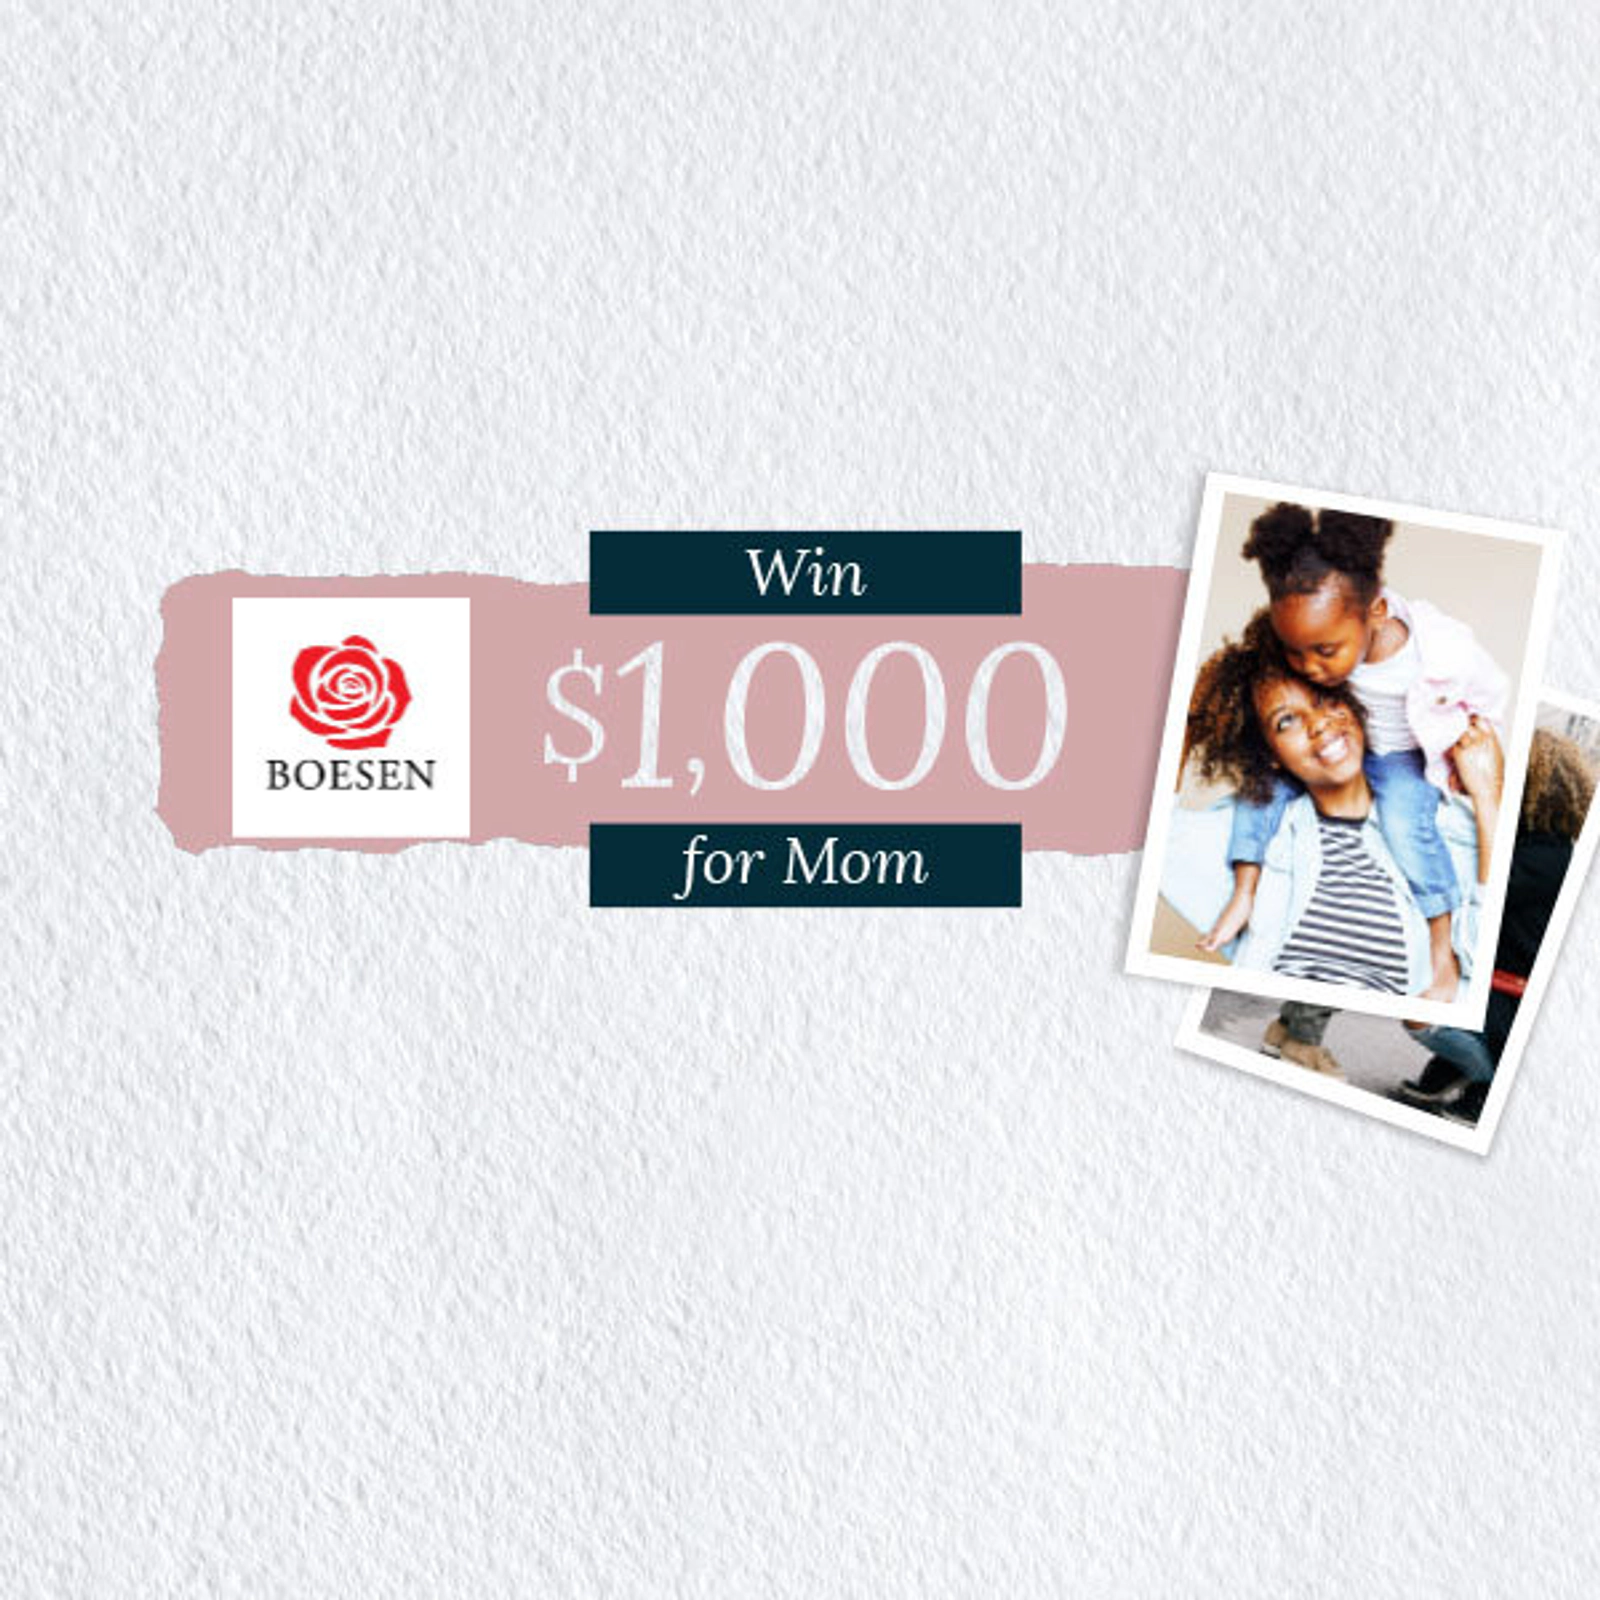    Win $1,000 for Mom and a Boesen's Bouquet!   - Thumbnail Image